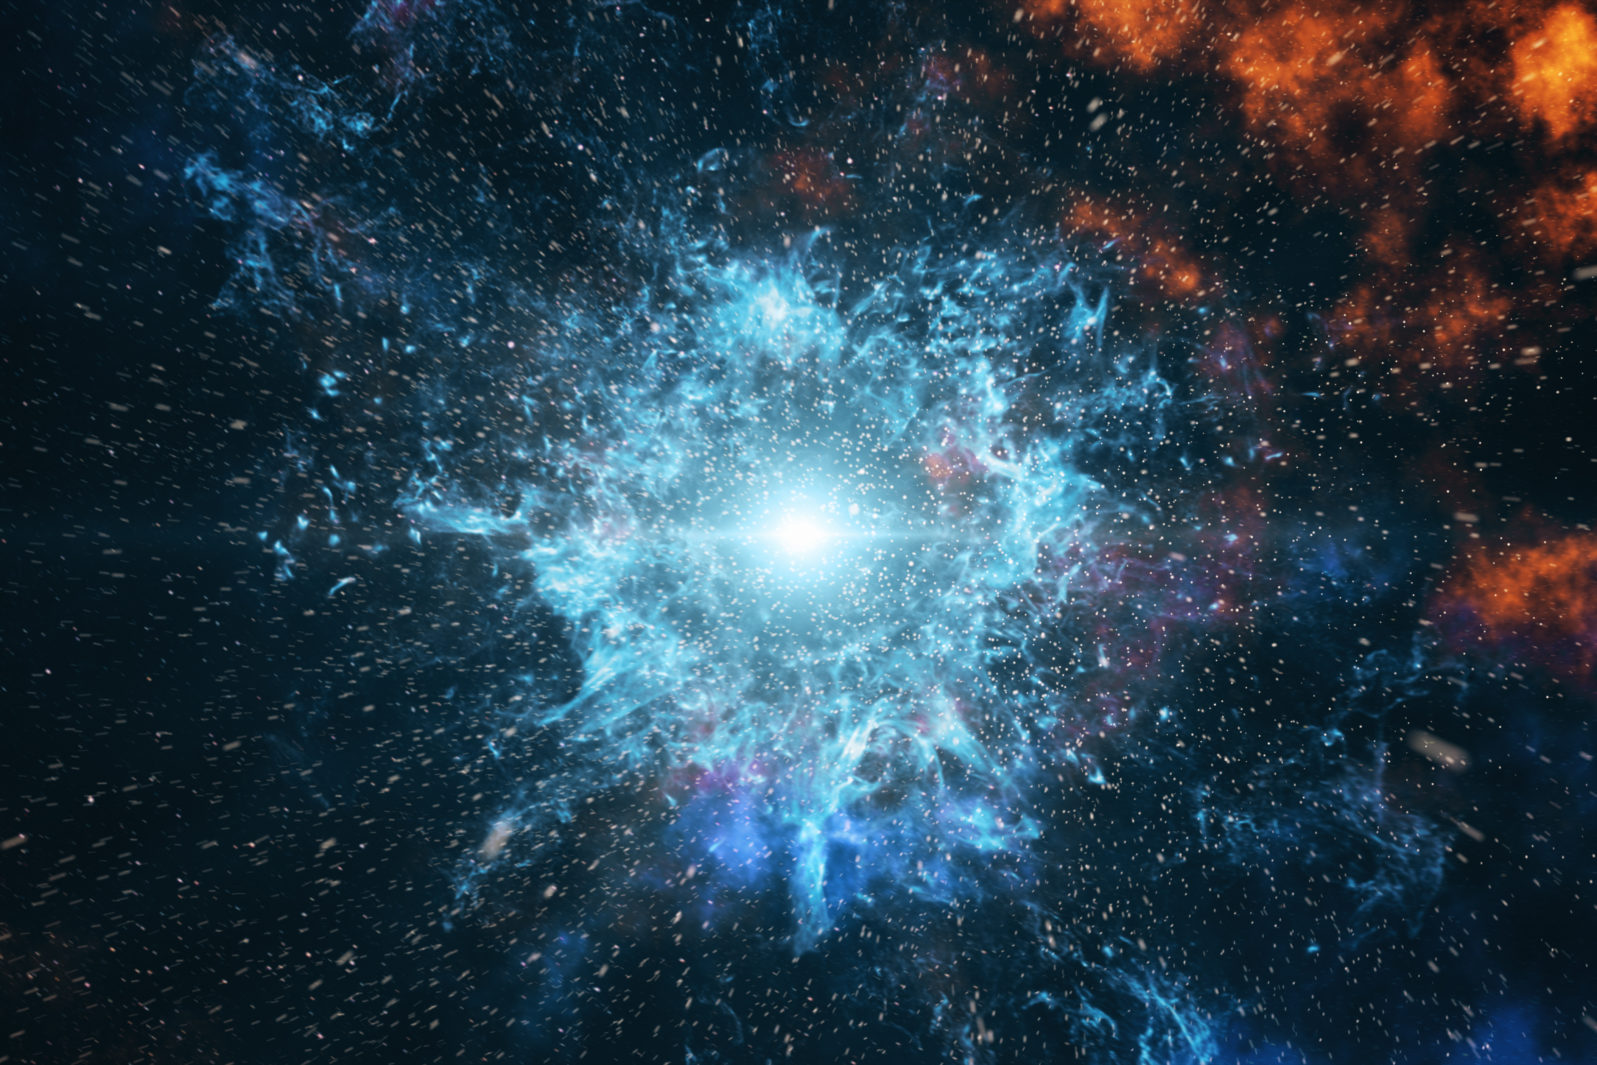 Big Bang in Space, The Birth of the Universe 3d illustration